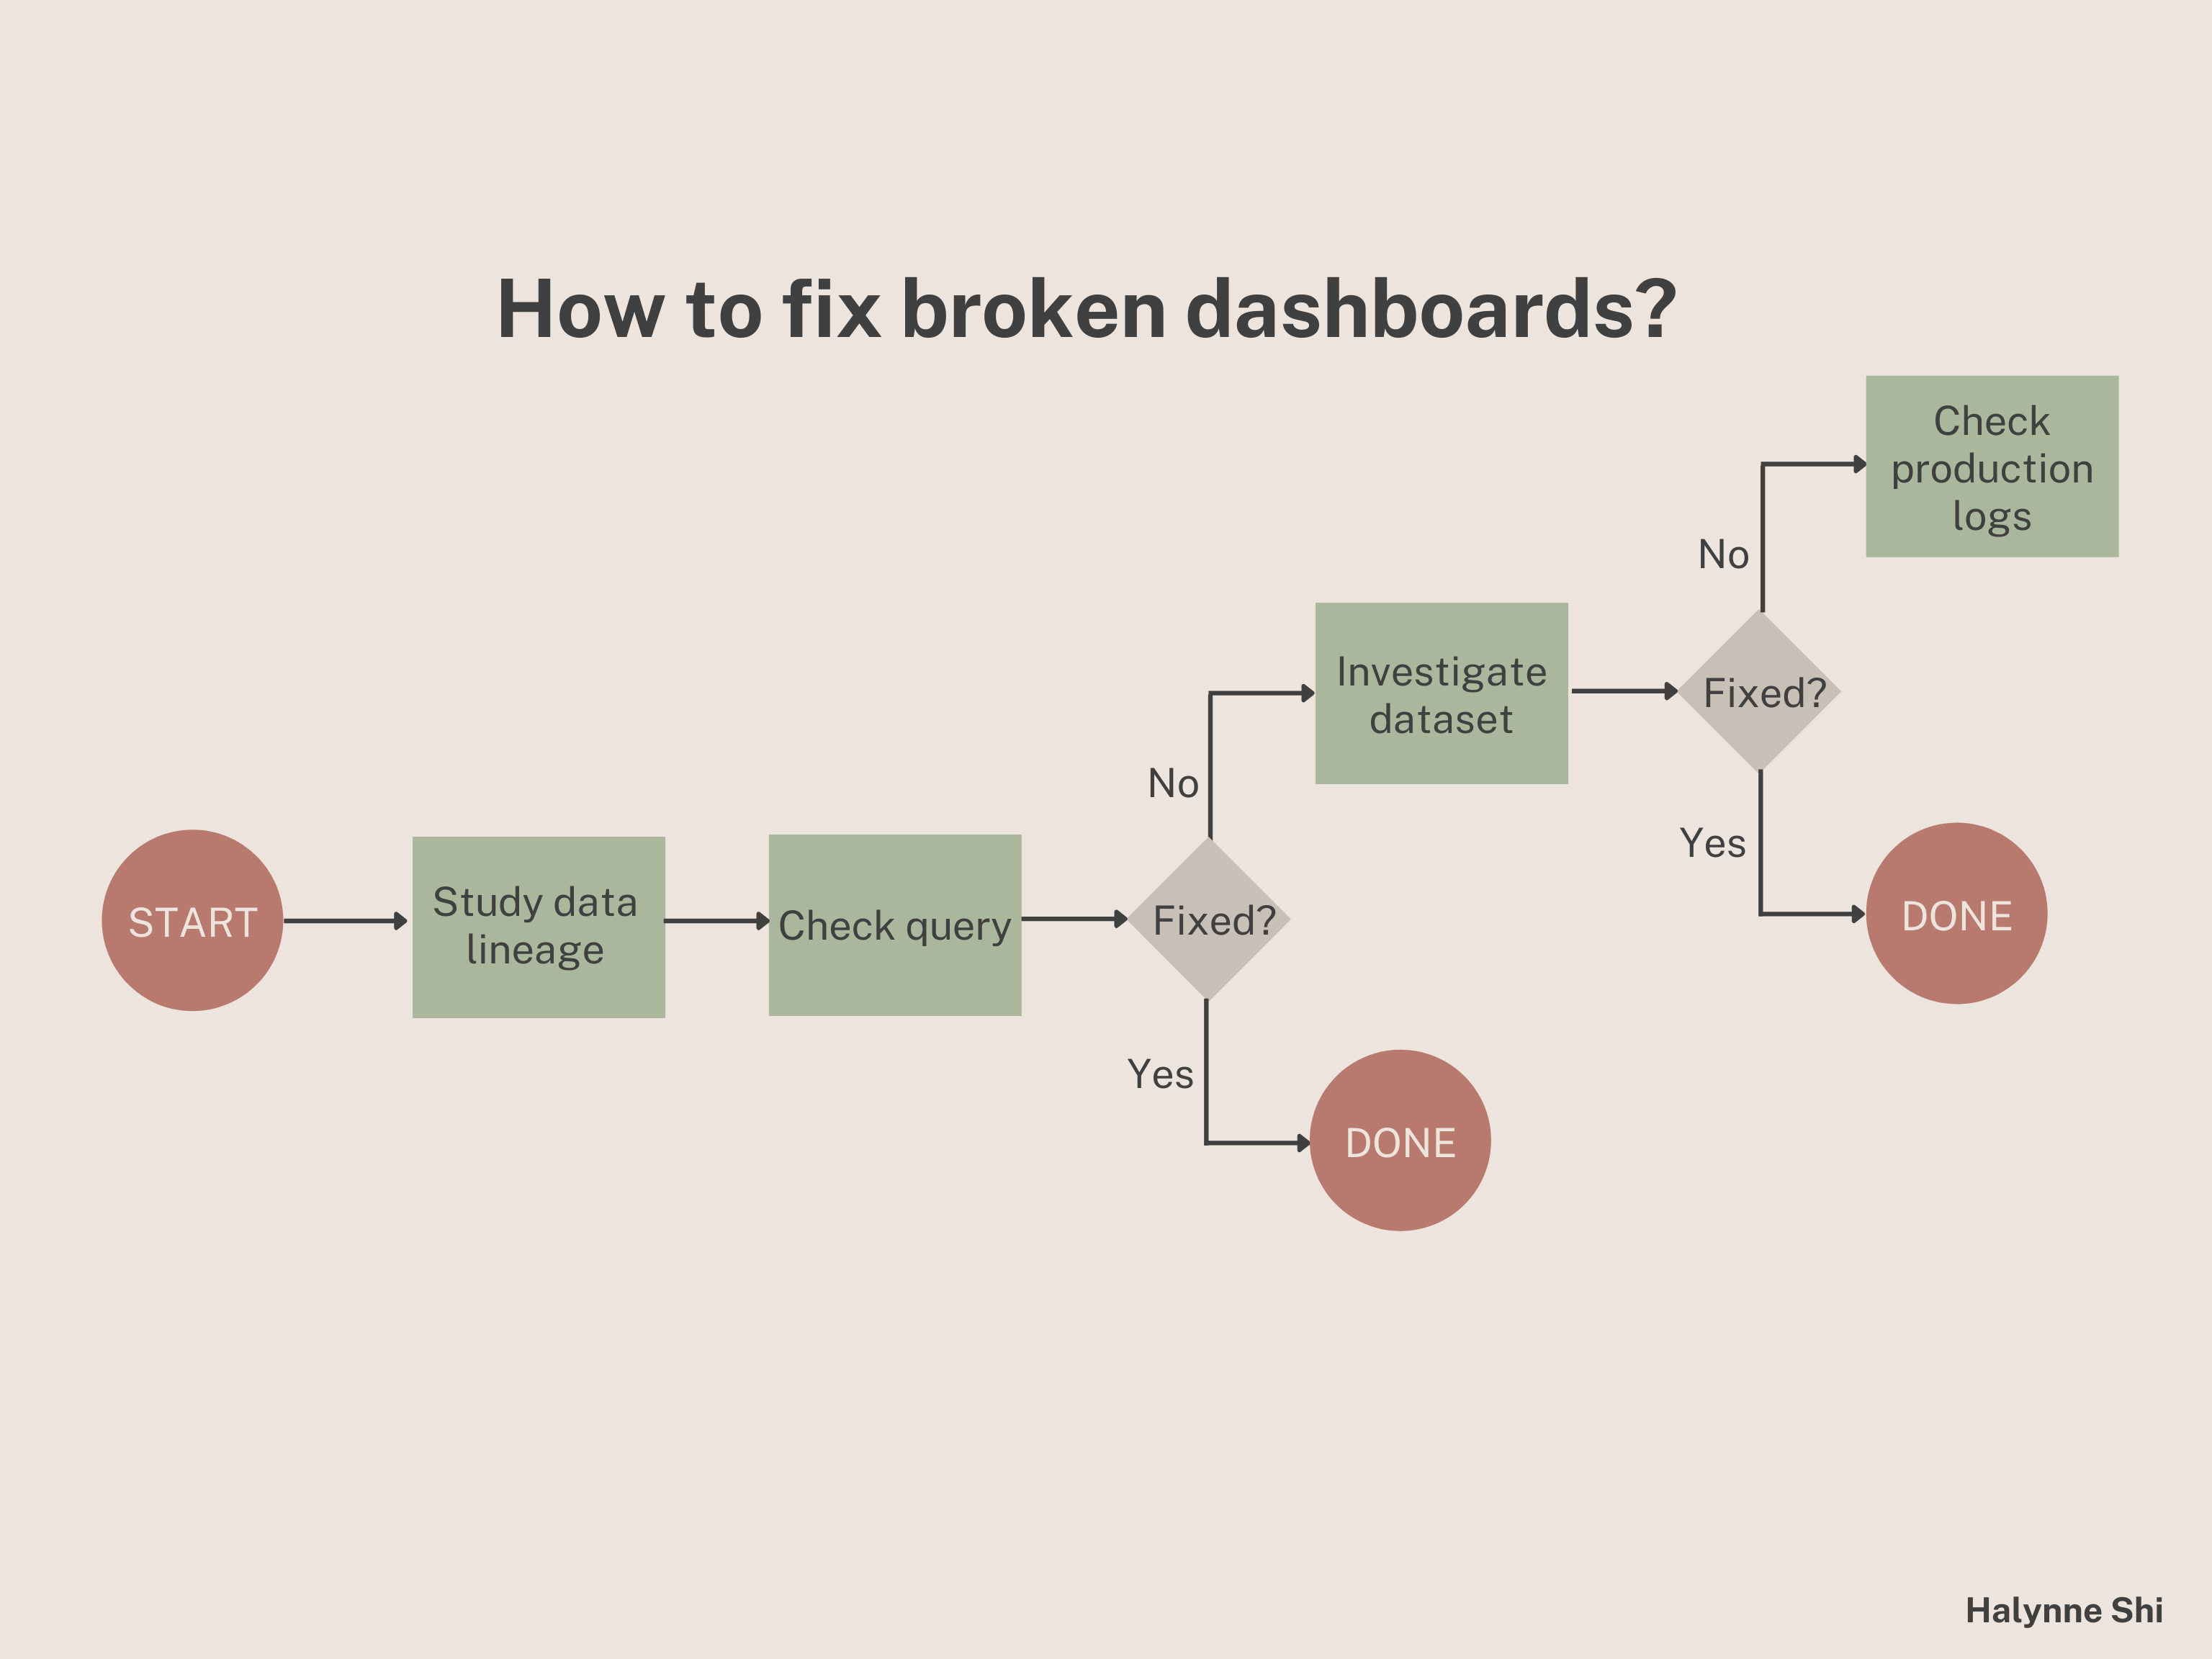 an image showing steps on how to fix broken dashboards